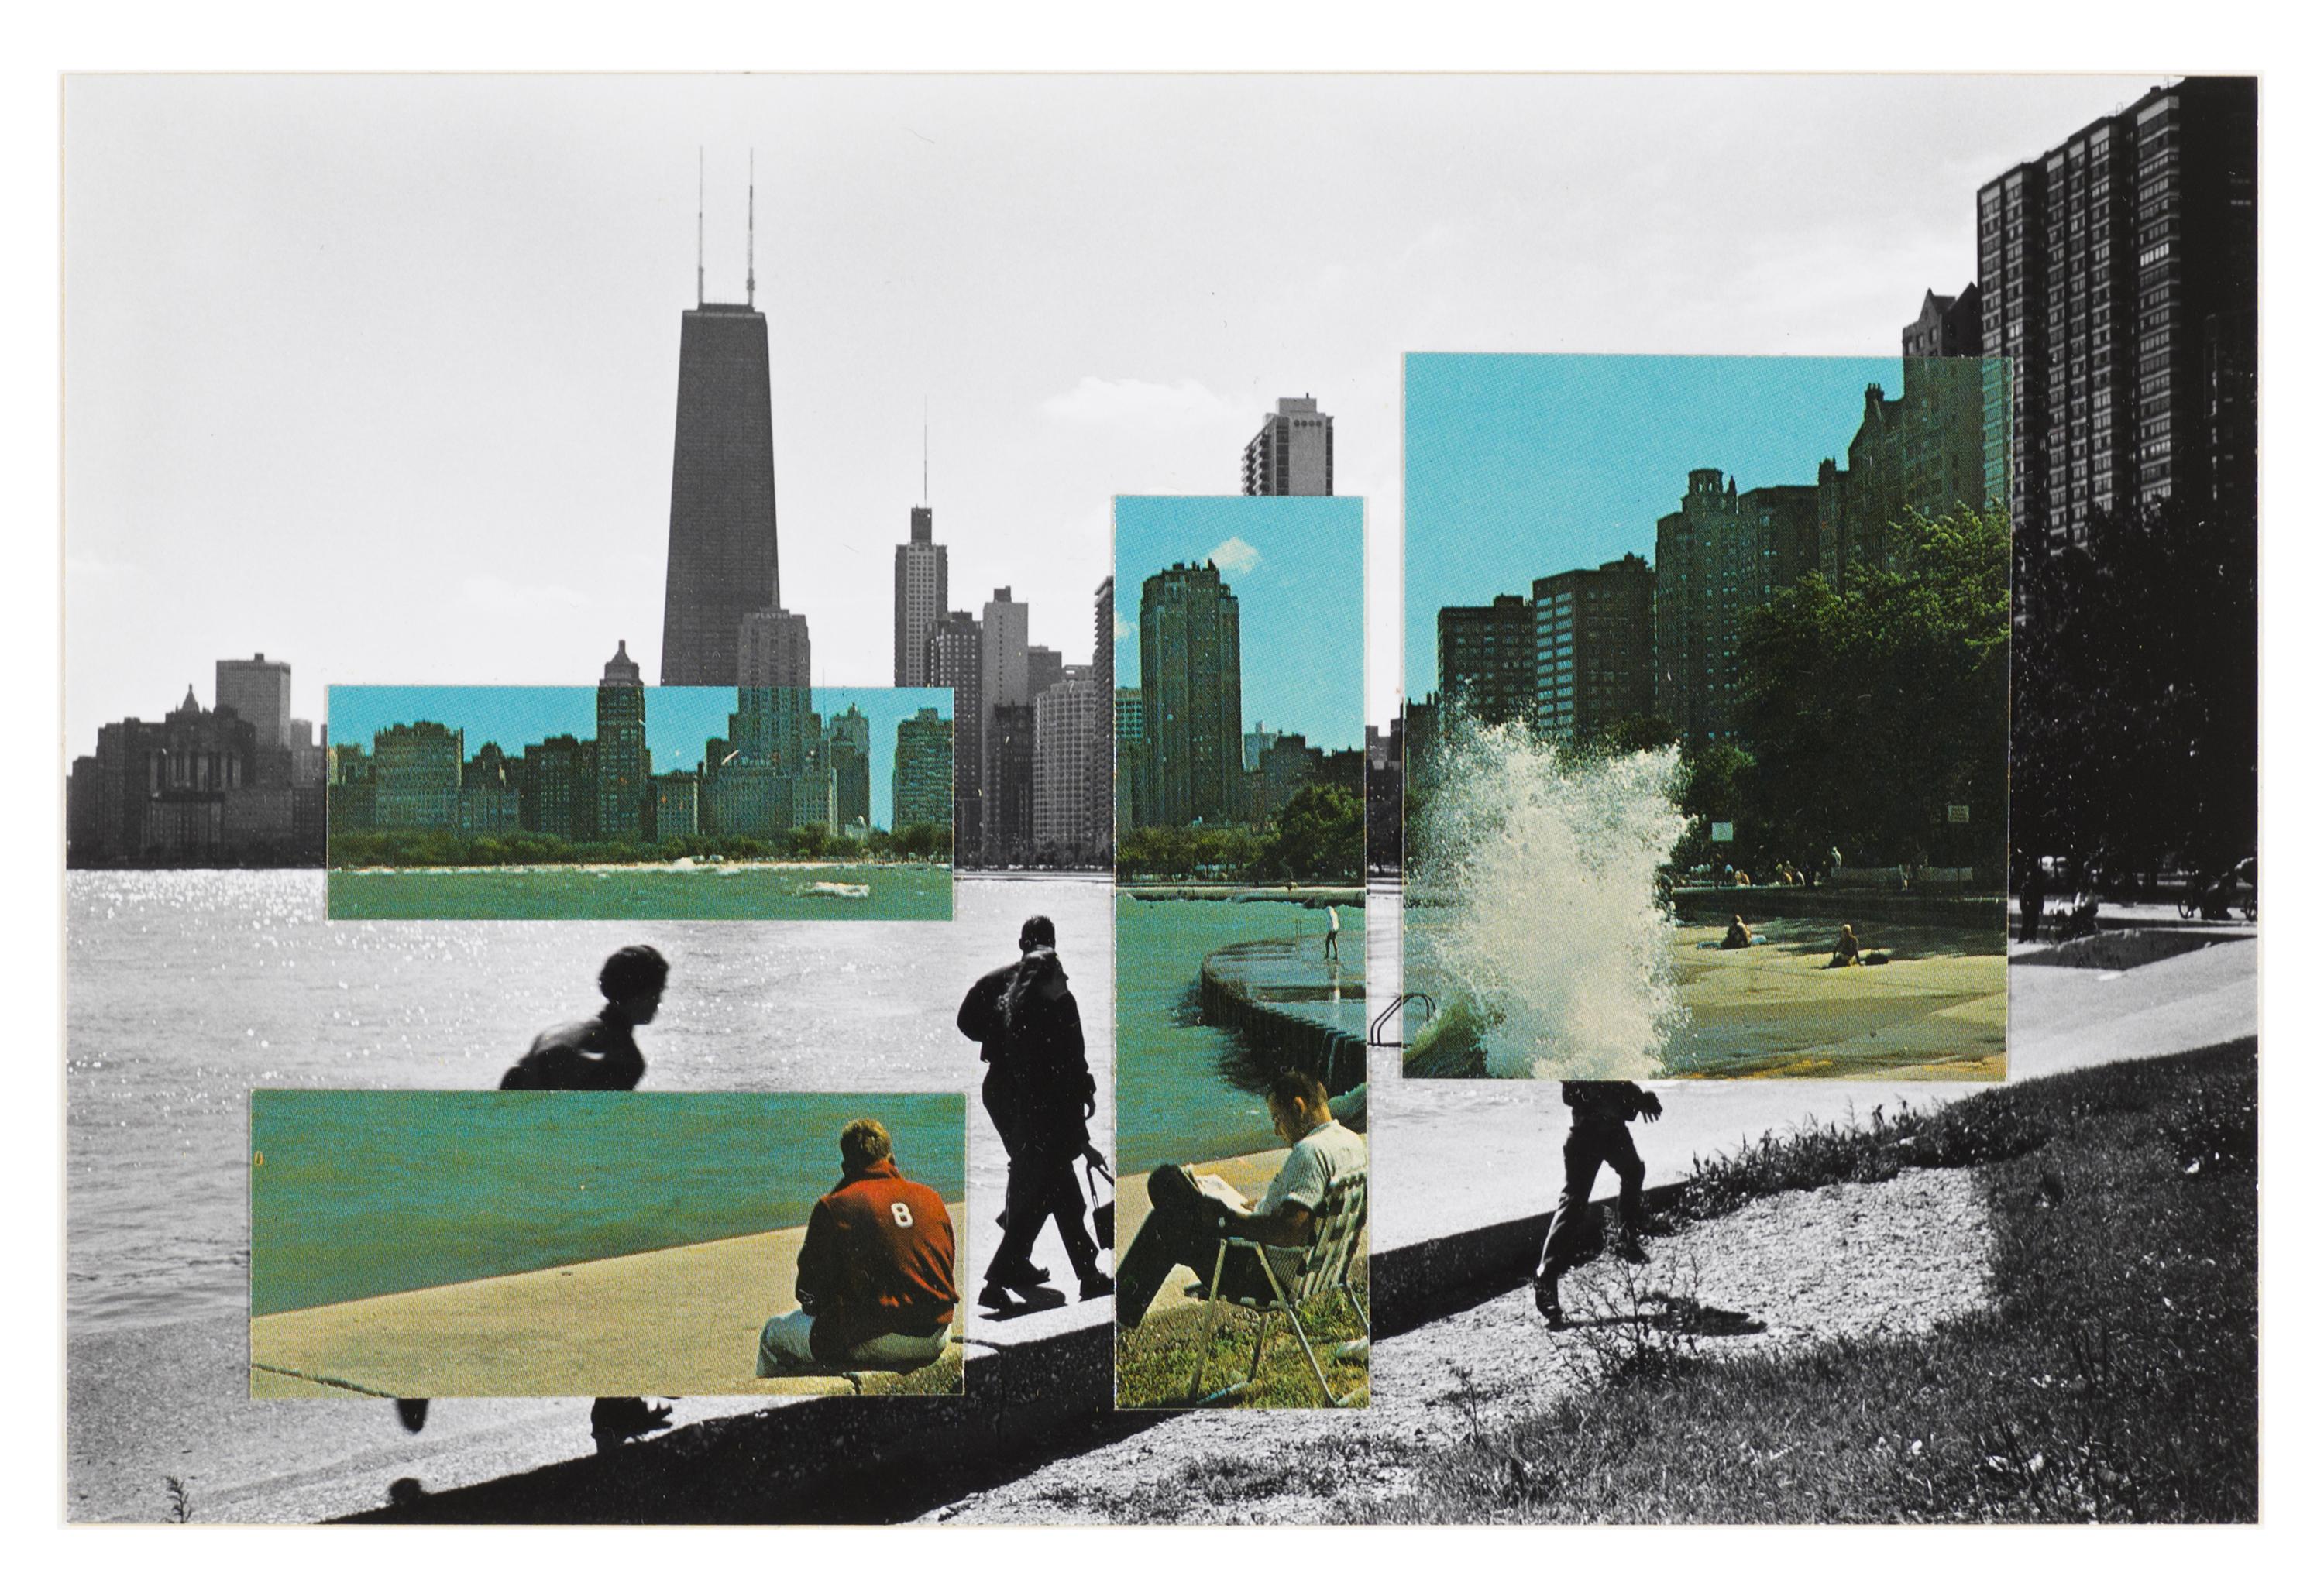 A black-and-white photo of the Chicago skyline from the north shore of Lake Michigan is overlaid with rectangular color image fragments of the same view. The color images add and subtract people from the lakefront view.